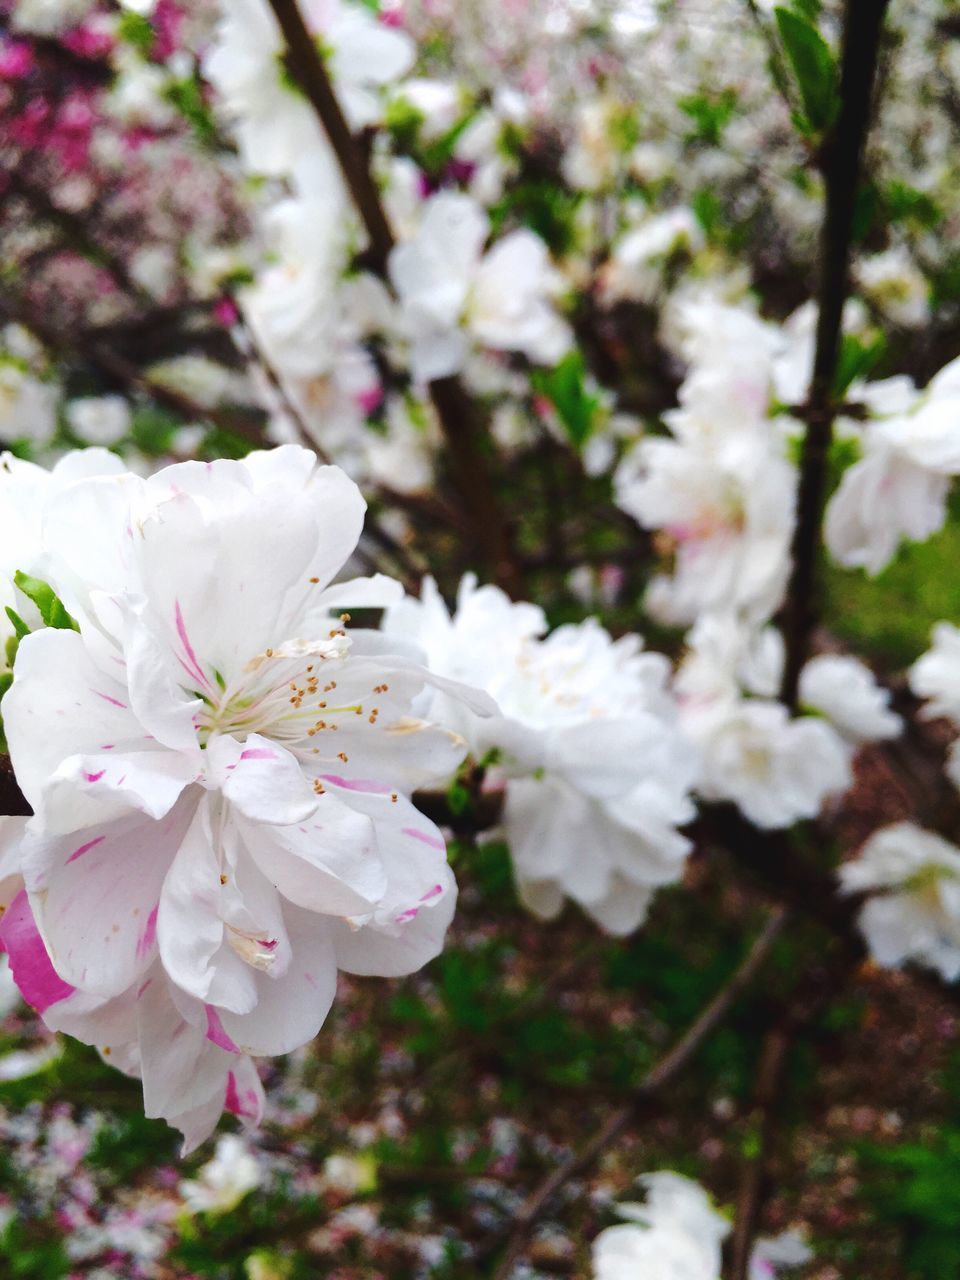 flower, freshness, fragility, growth, petal, beauty in nature, white color, focus on foreground, flower head, nature, close-up, blooming, blossom, cherry blossom, in bloom, branch, tree, springtime, park - man made space, stamen